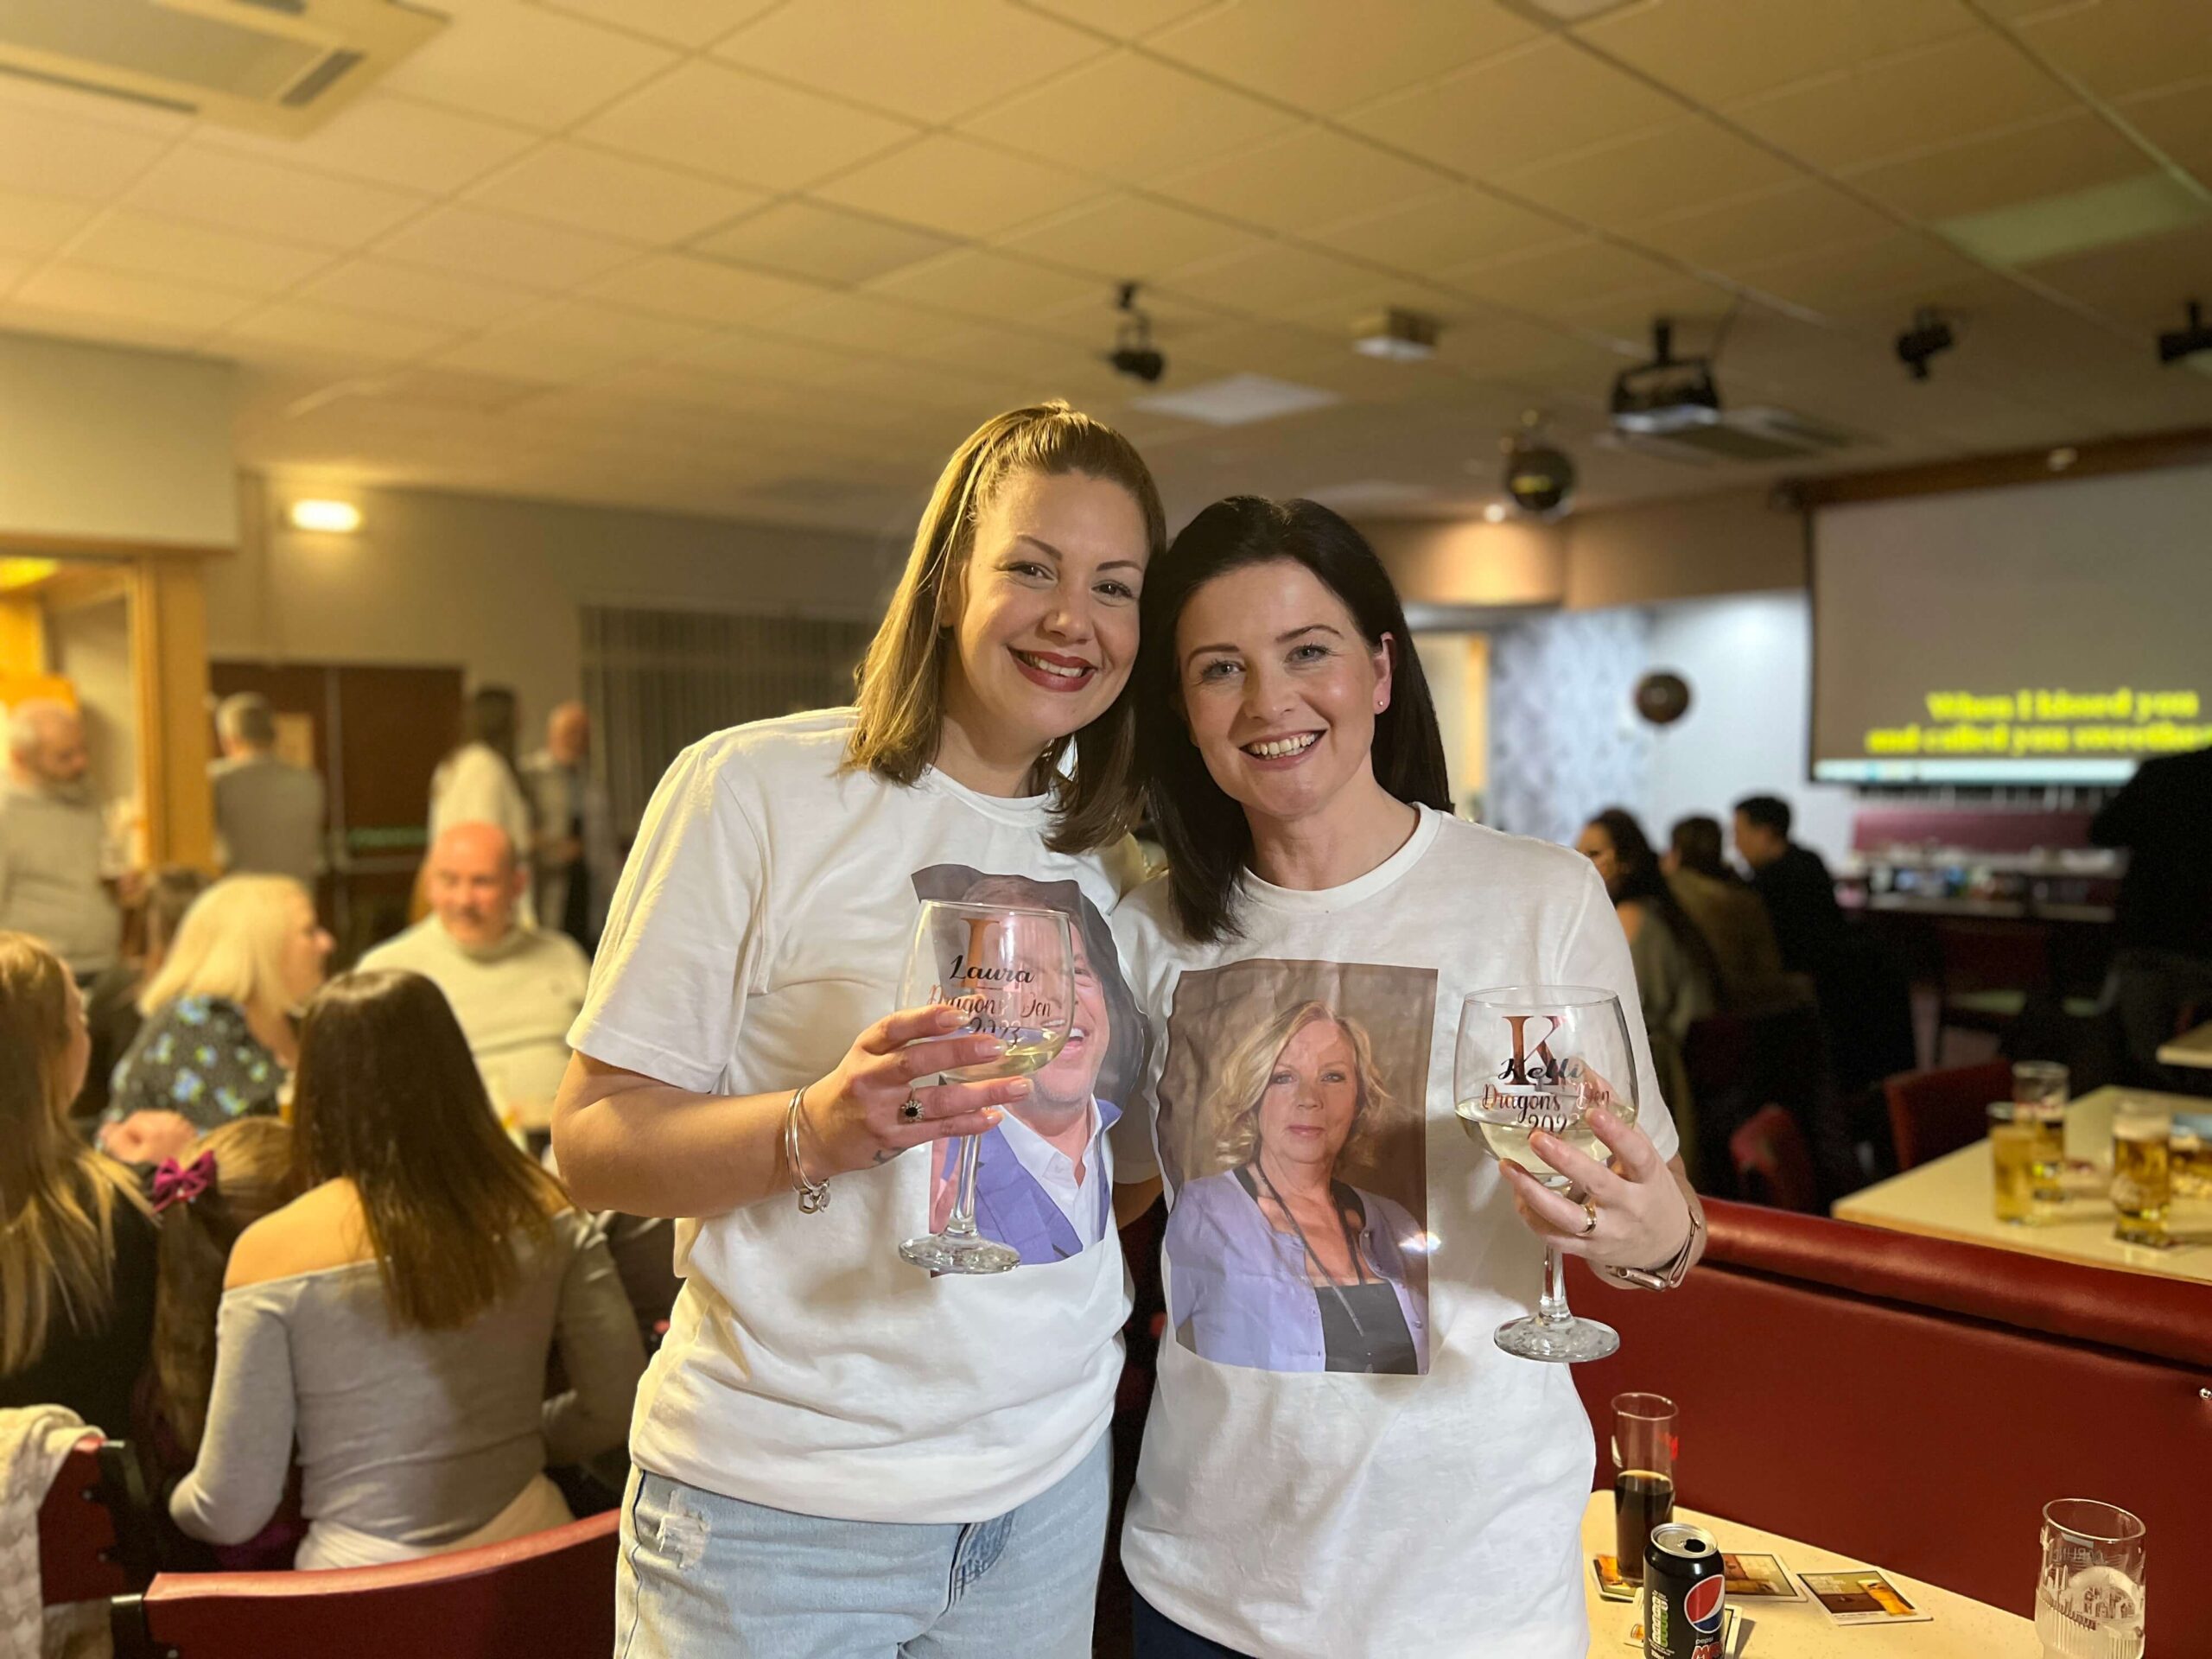 Kelli Aspland and Laura Waters wearing t-shirts of their dragon's den investors